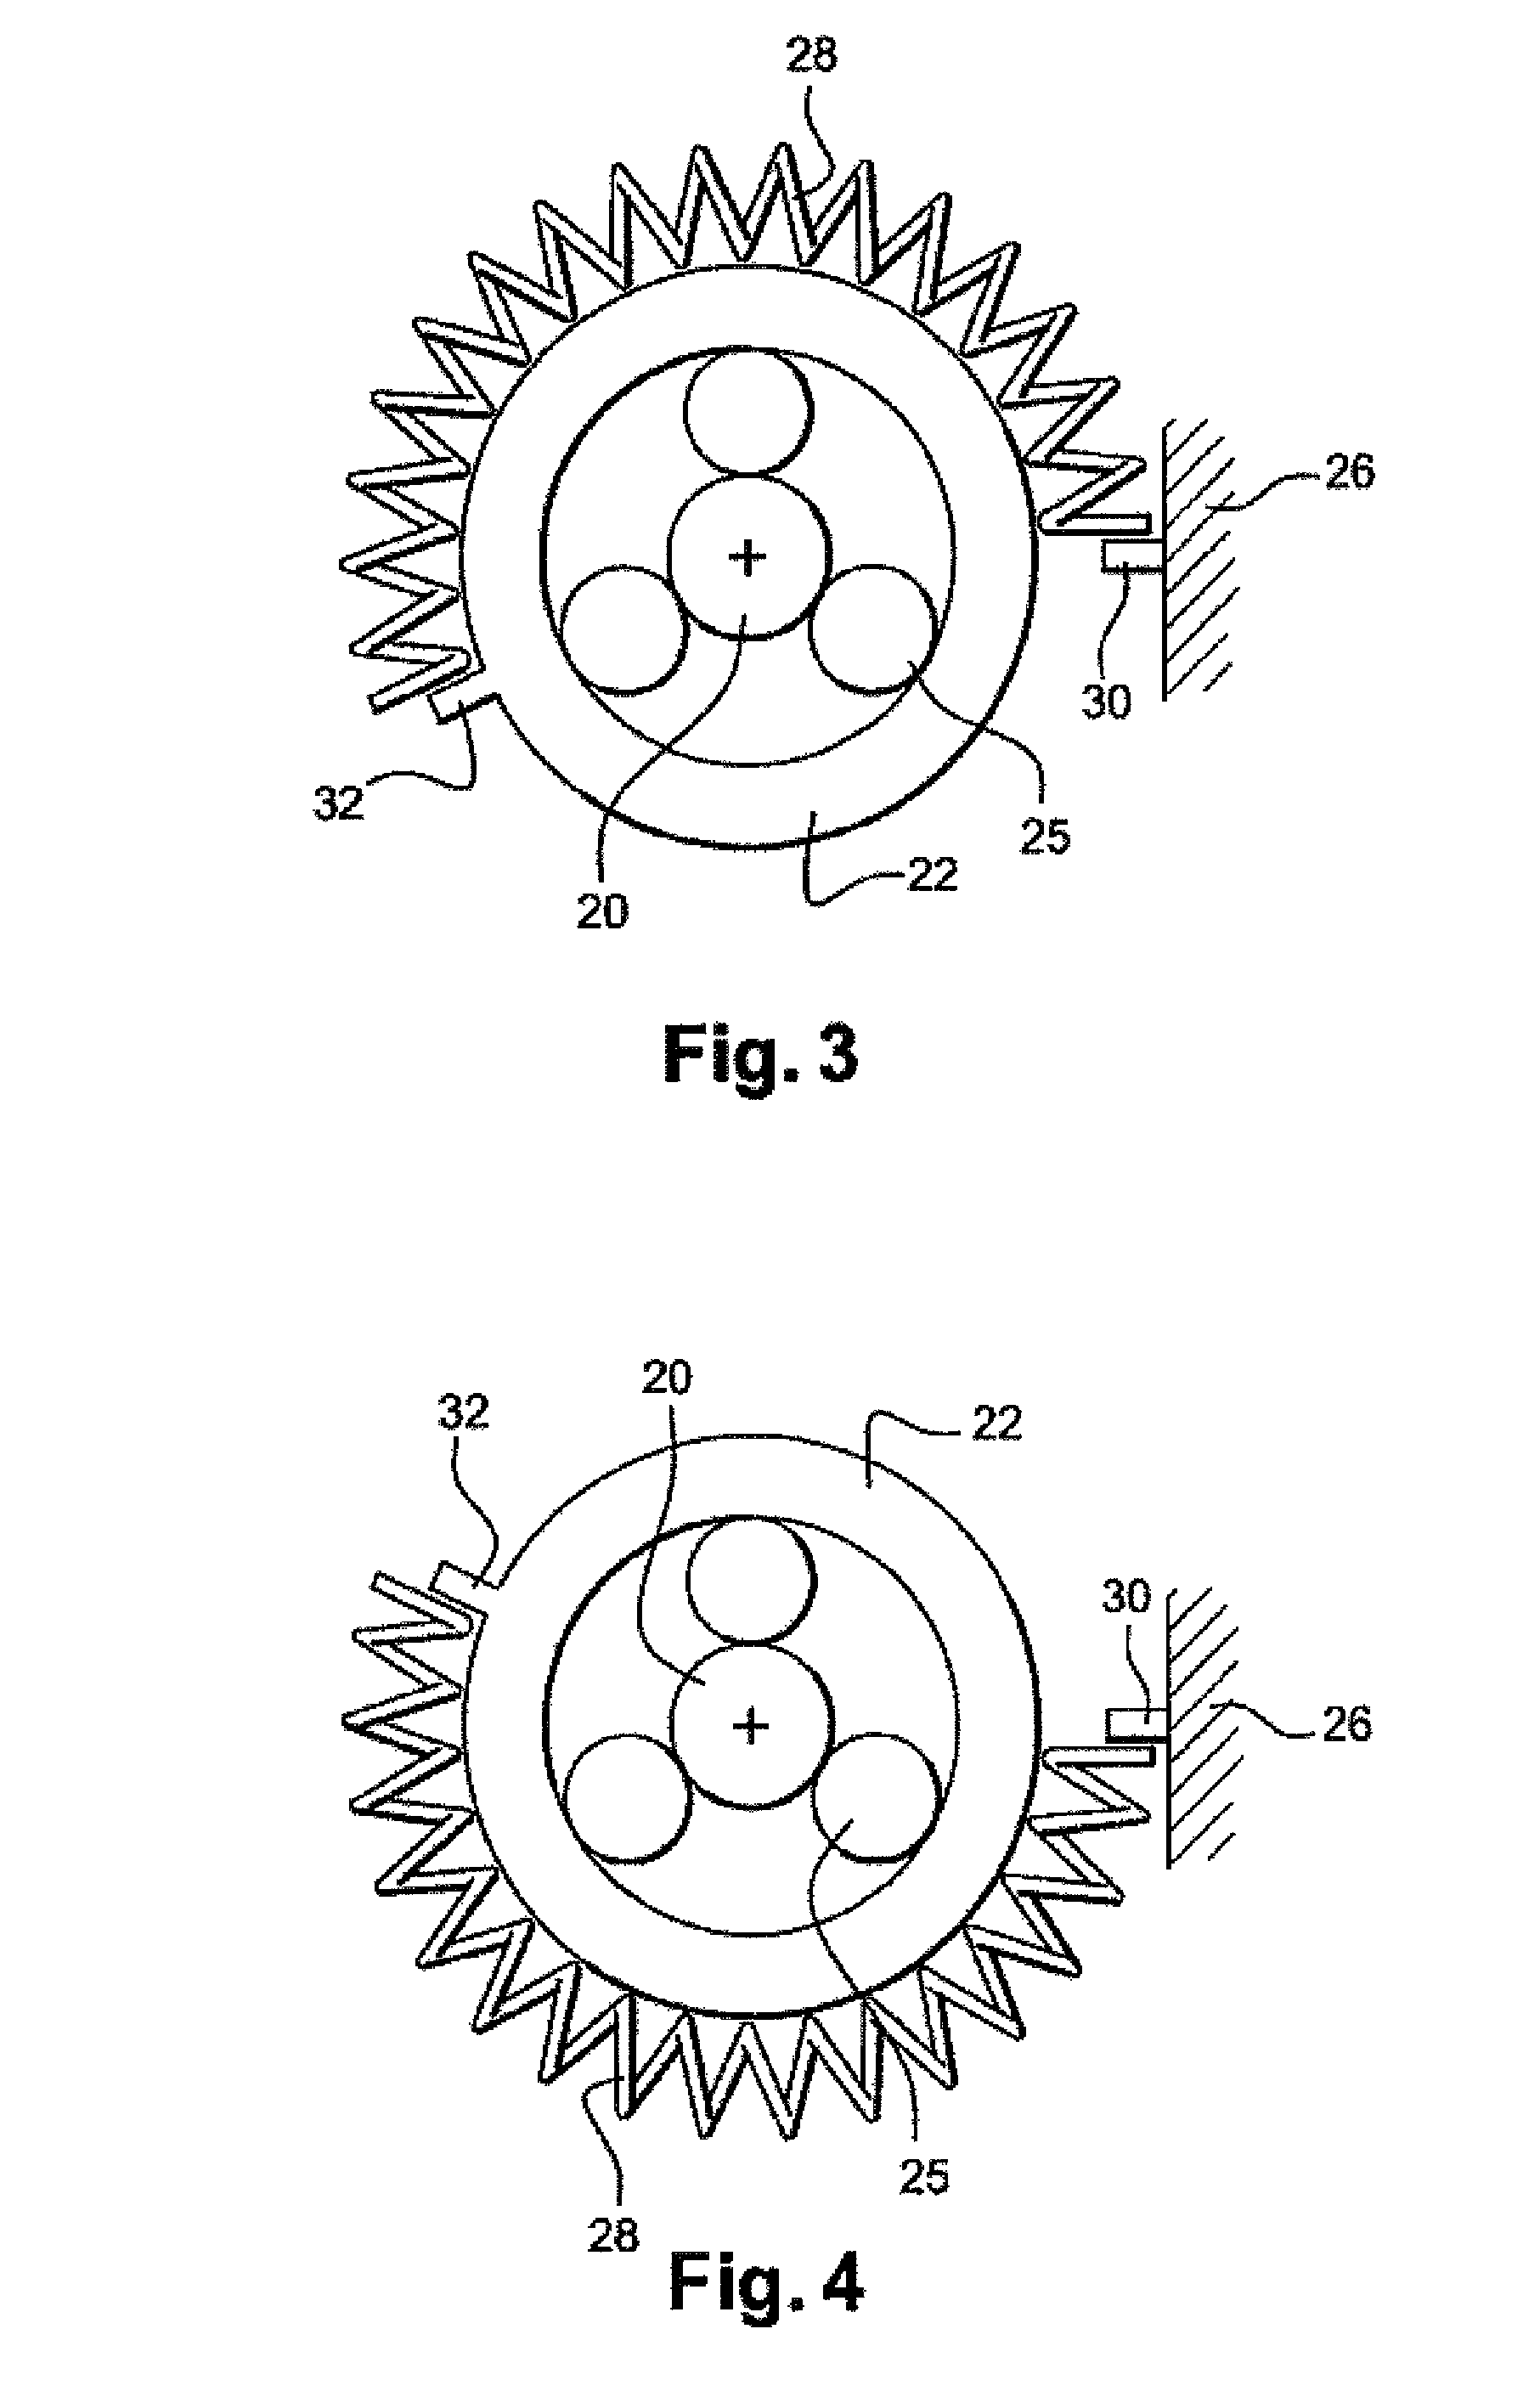 Double-fly wheel damper with epicyclic gear train